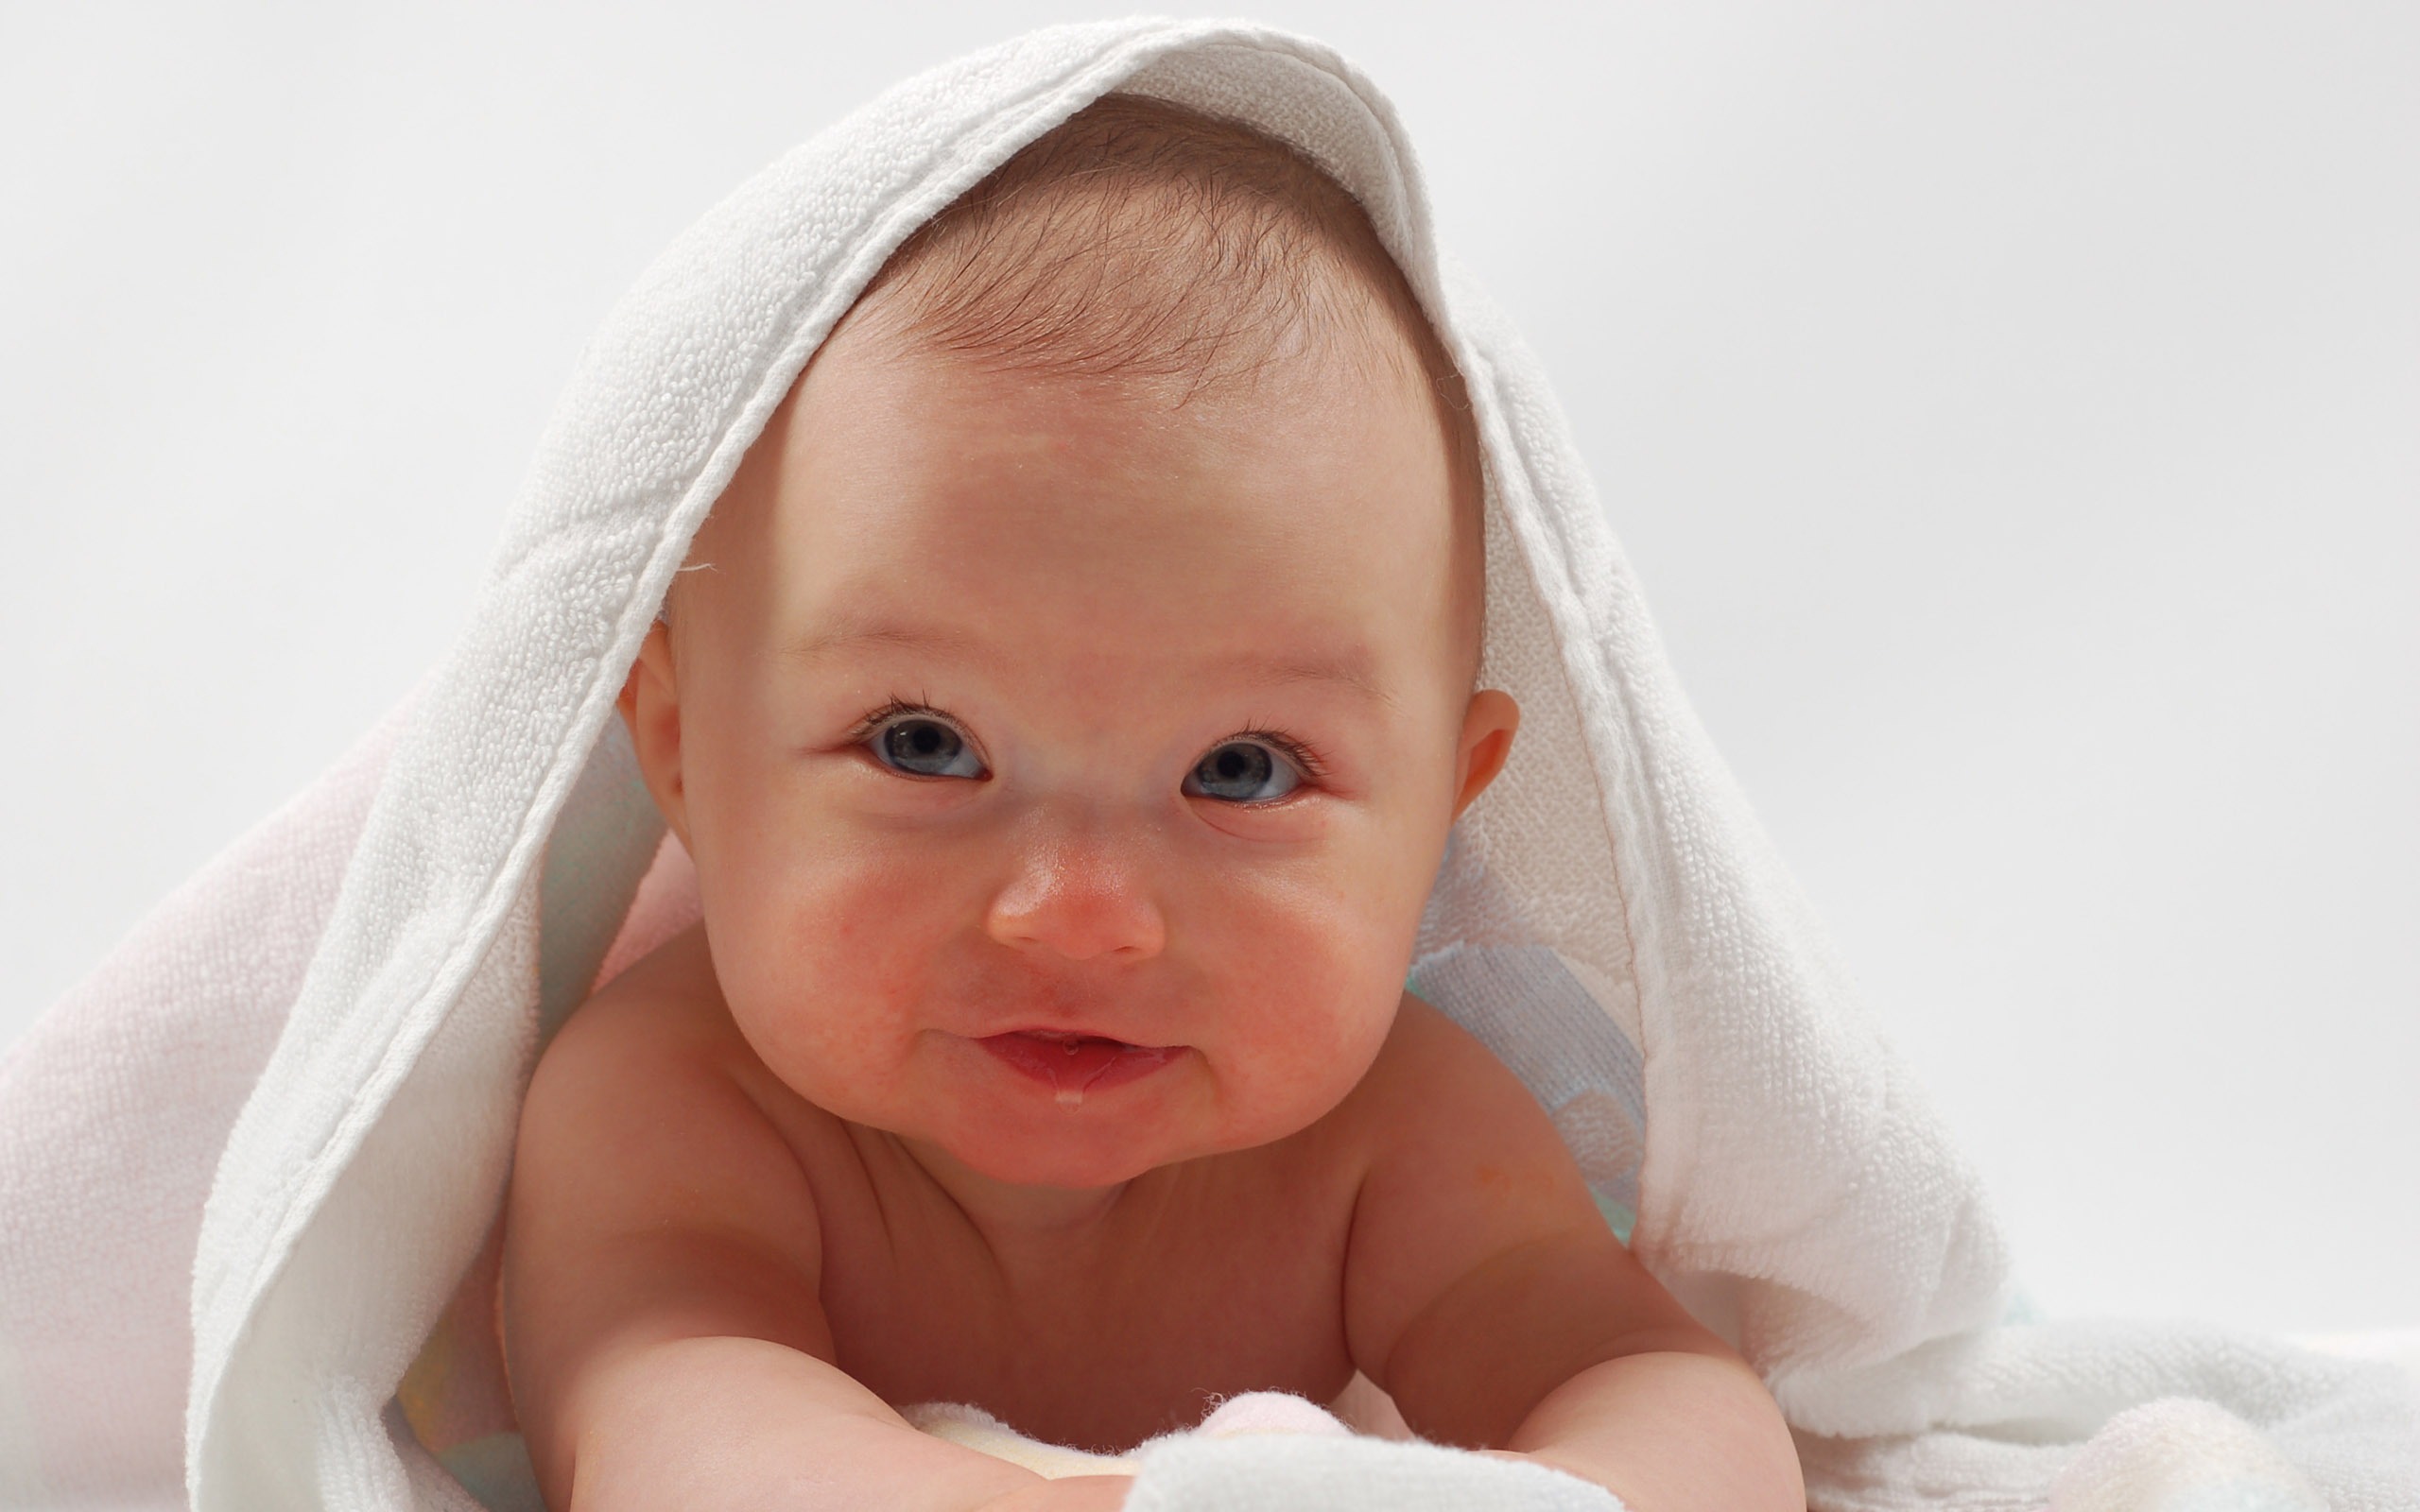 Cute Baby Wallpapers (4) #3 - 2560x1600